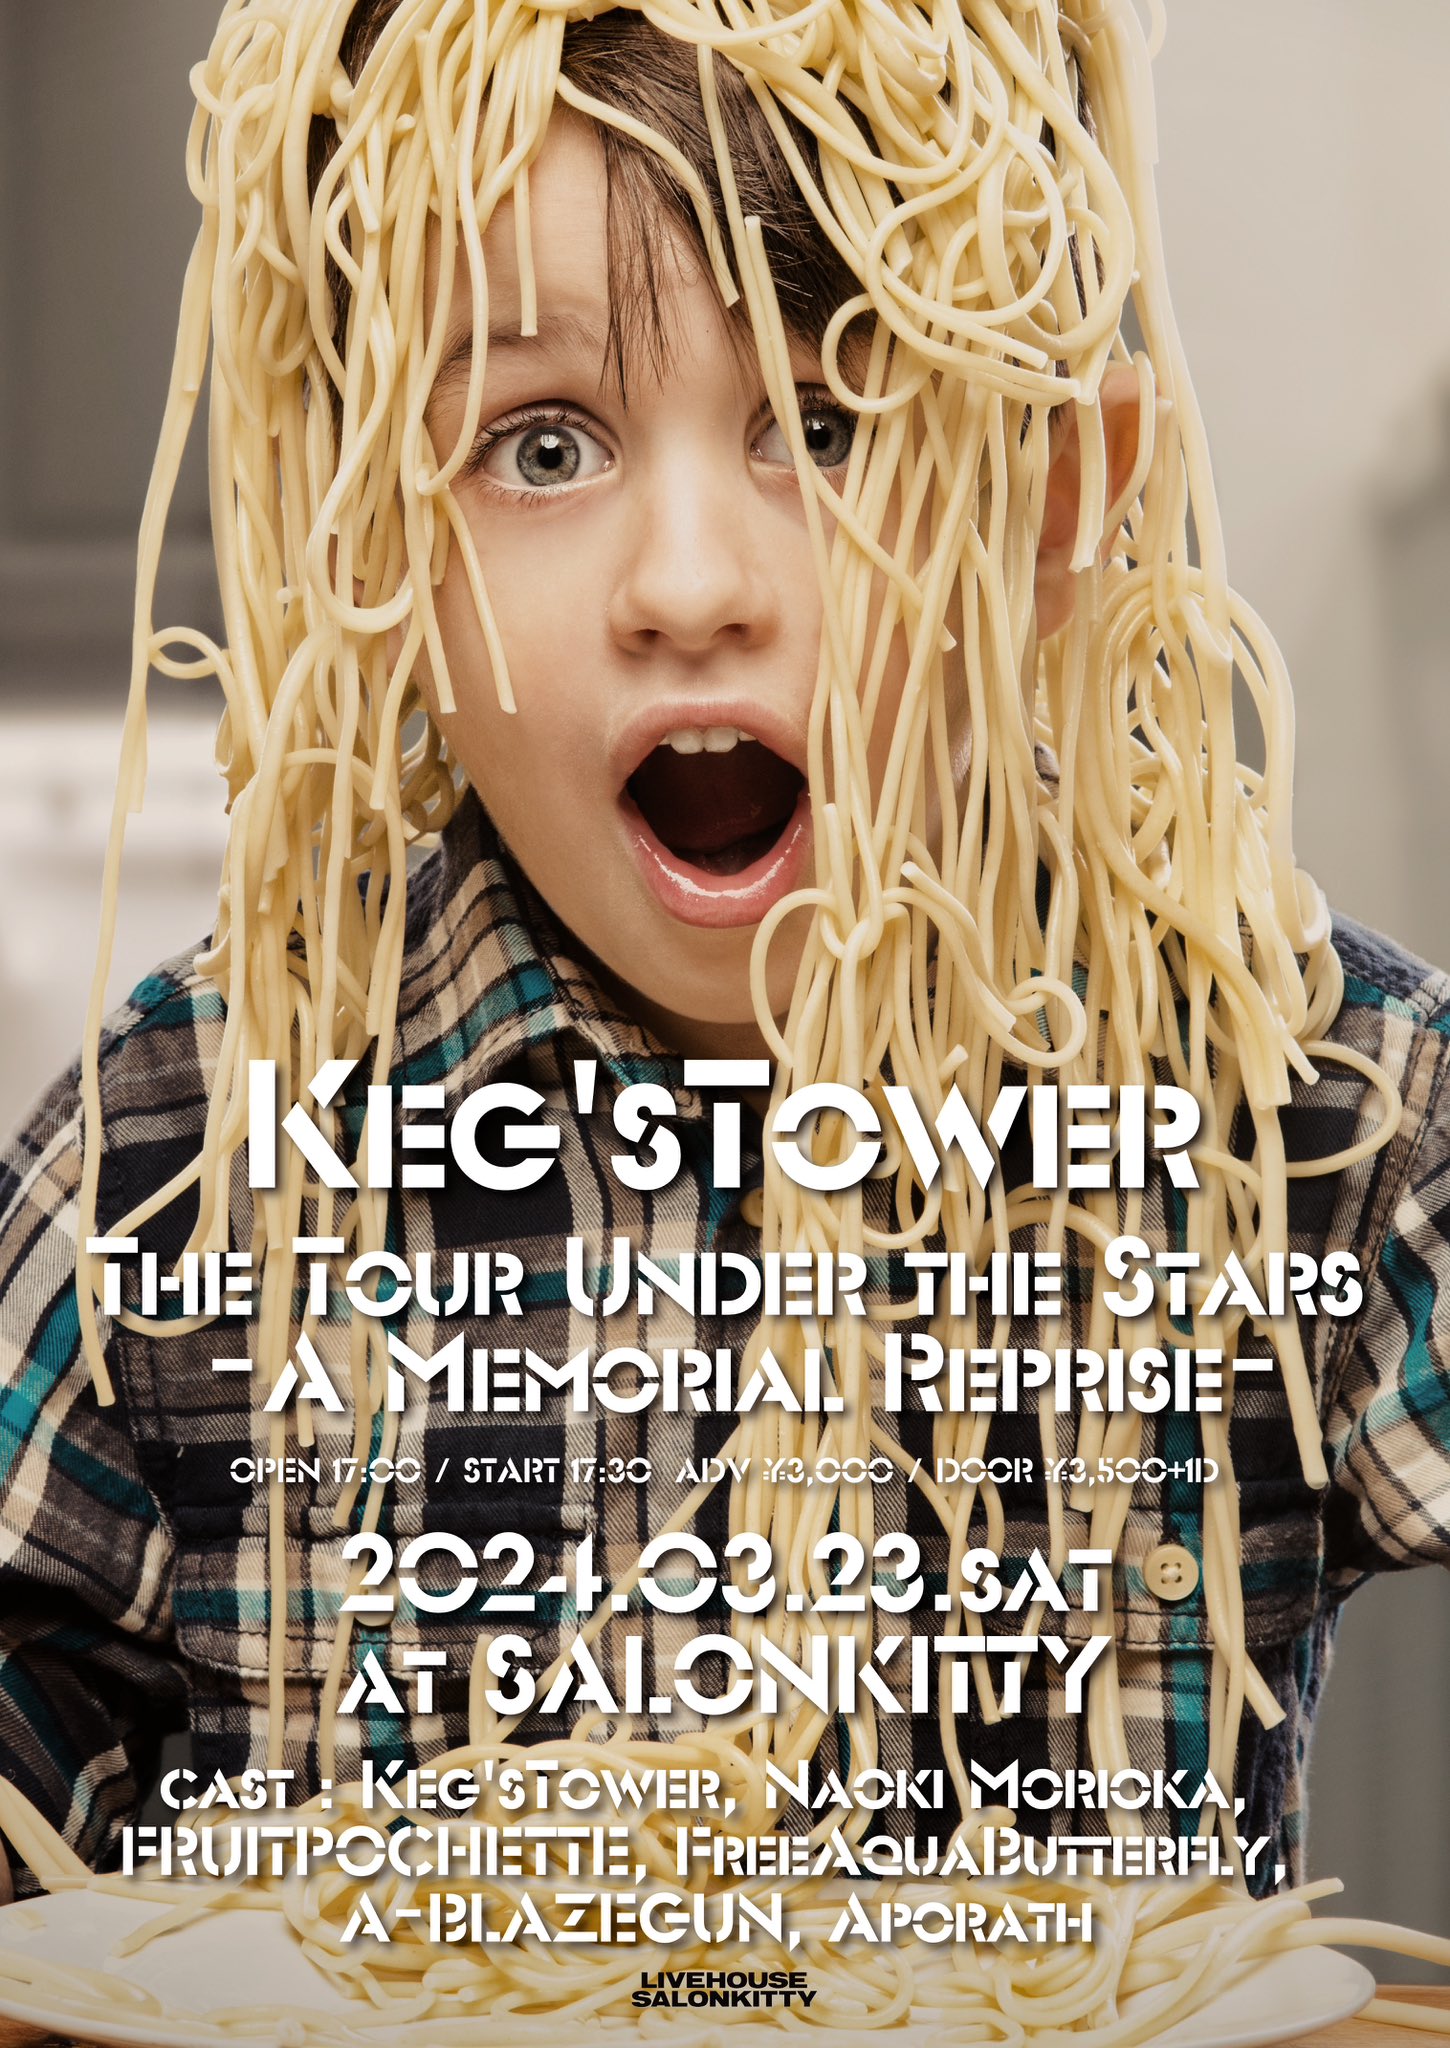 Keg’s Tower The Tour Under the Stars -A Memorial Reprise-